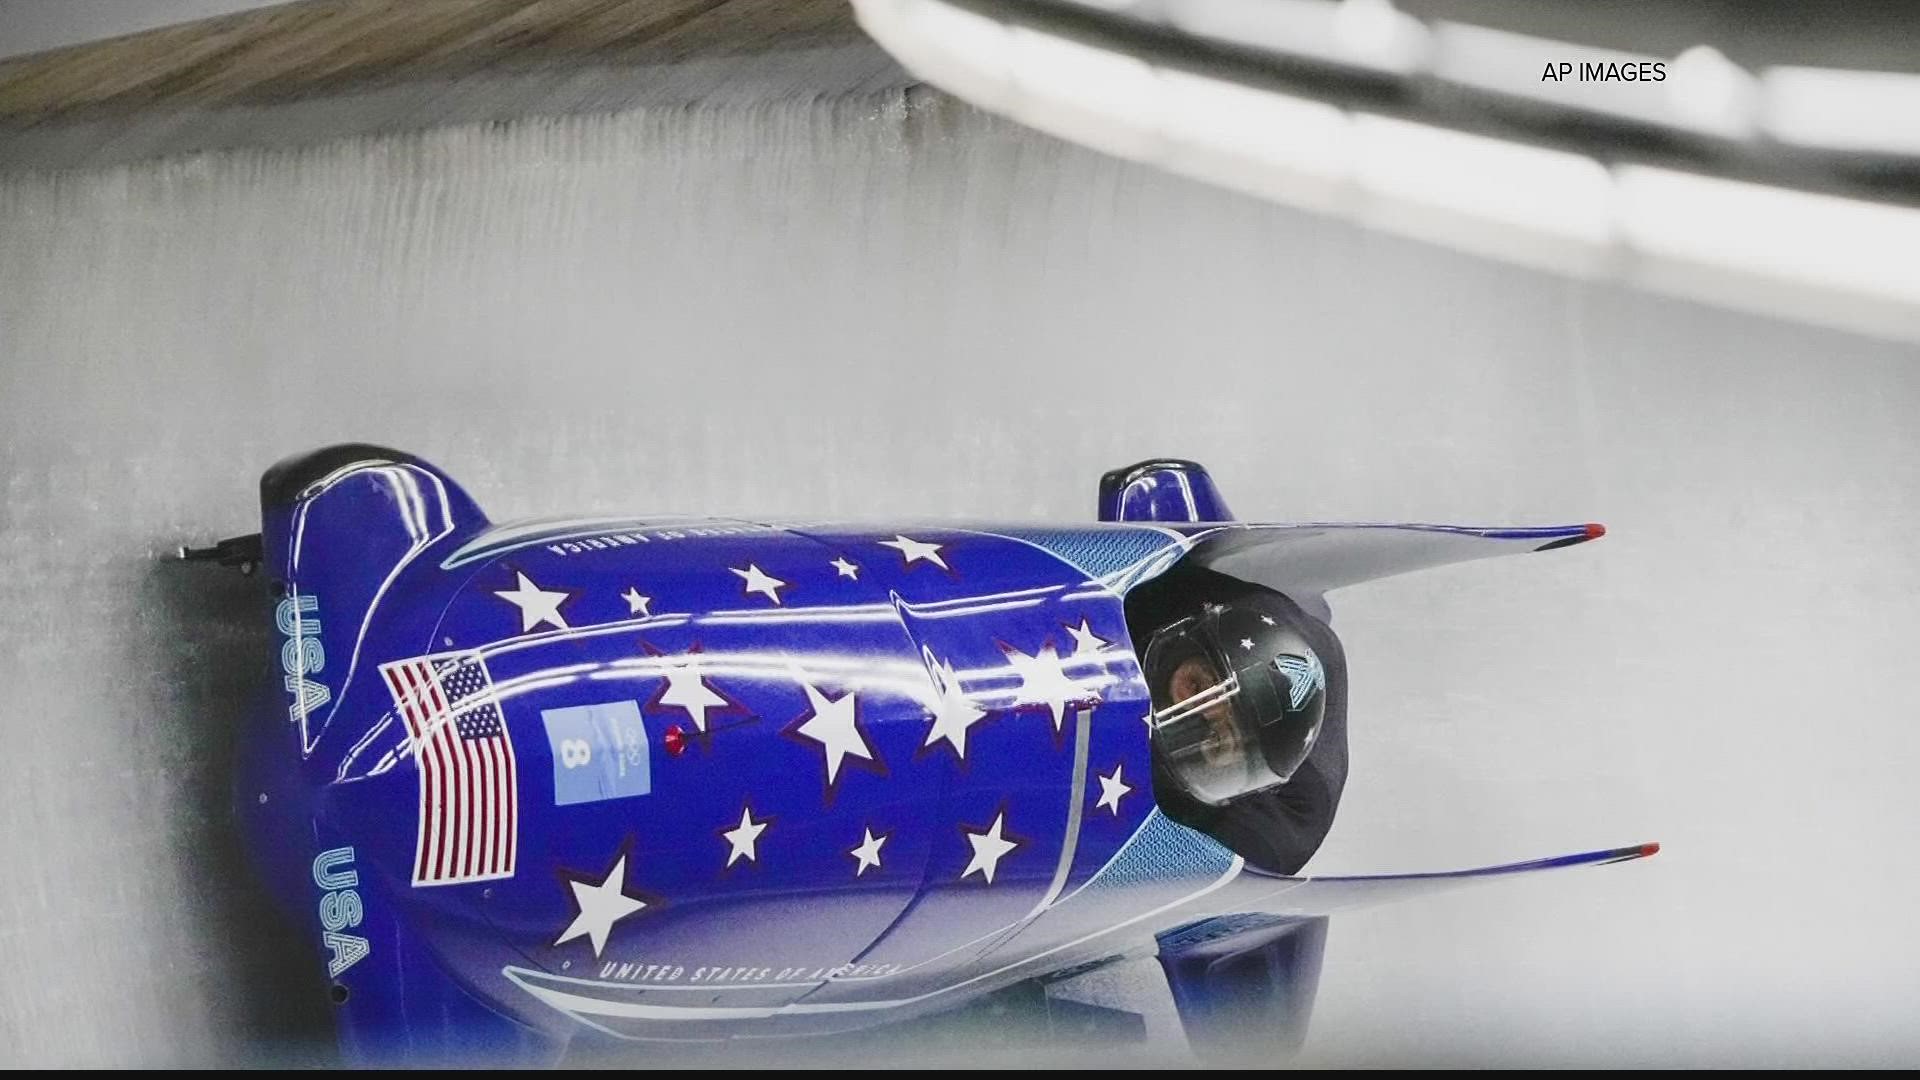 The Douglasville native competed Saturday in the two-woman bobsled final at the 2022 Winter Olympics.